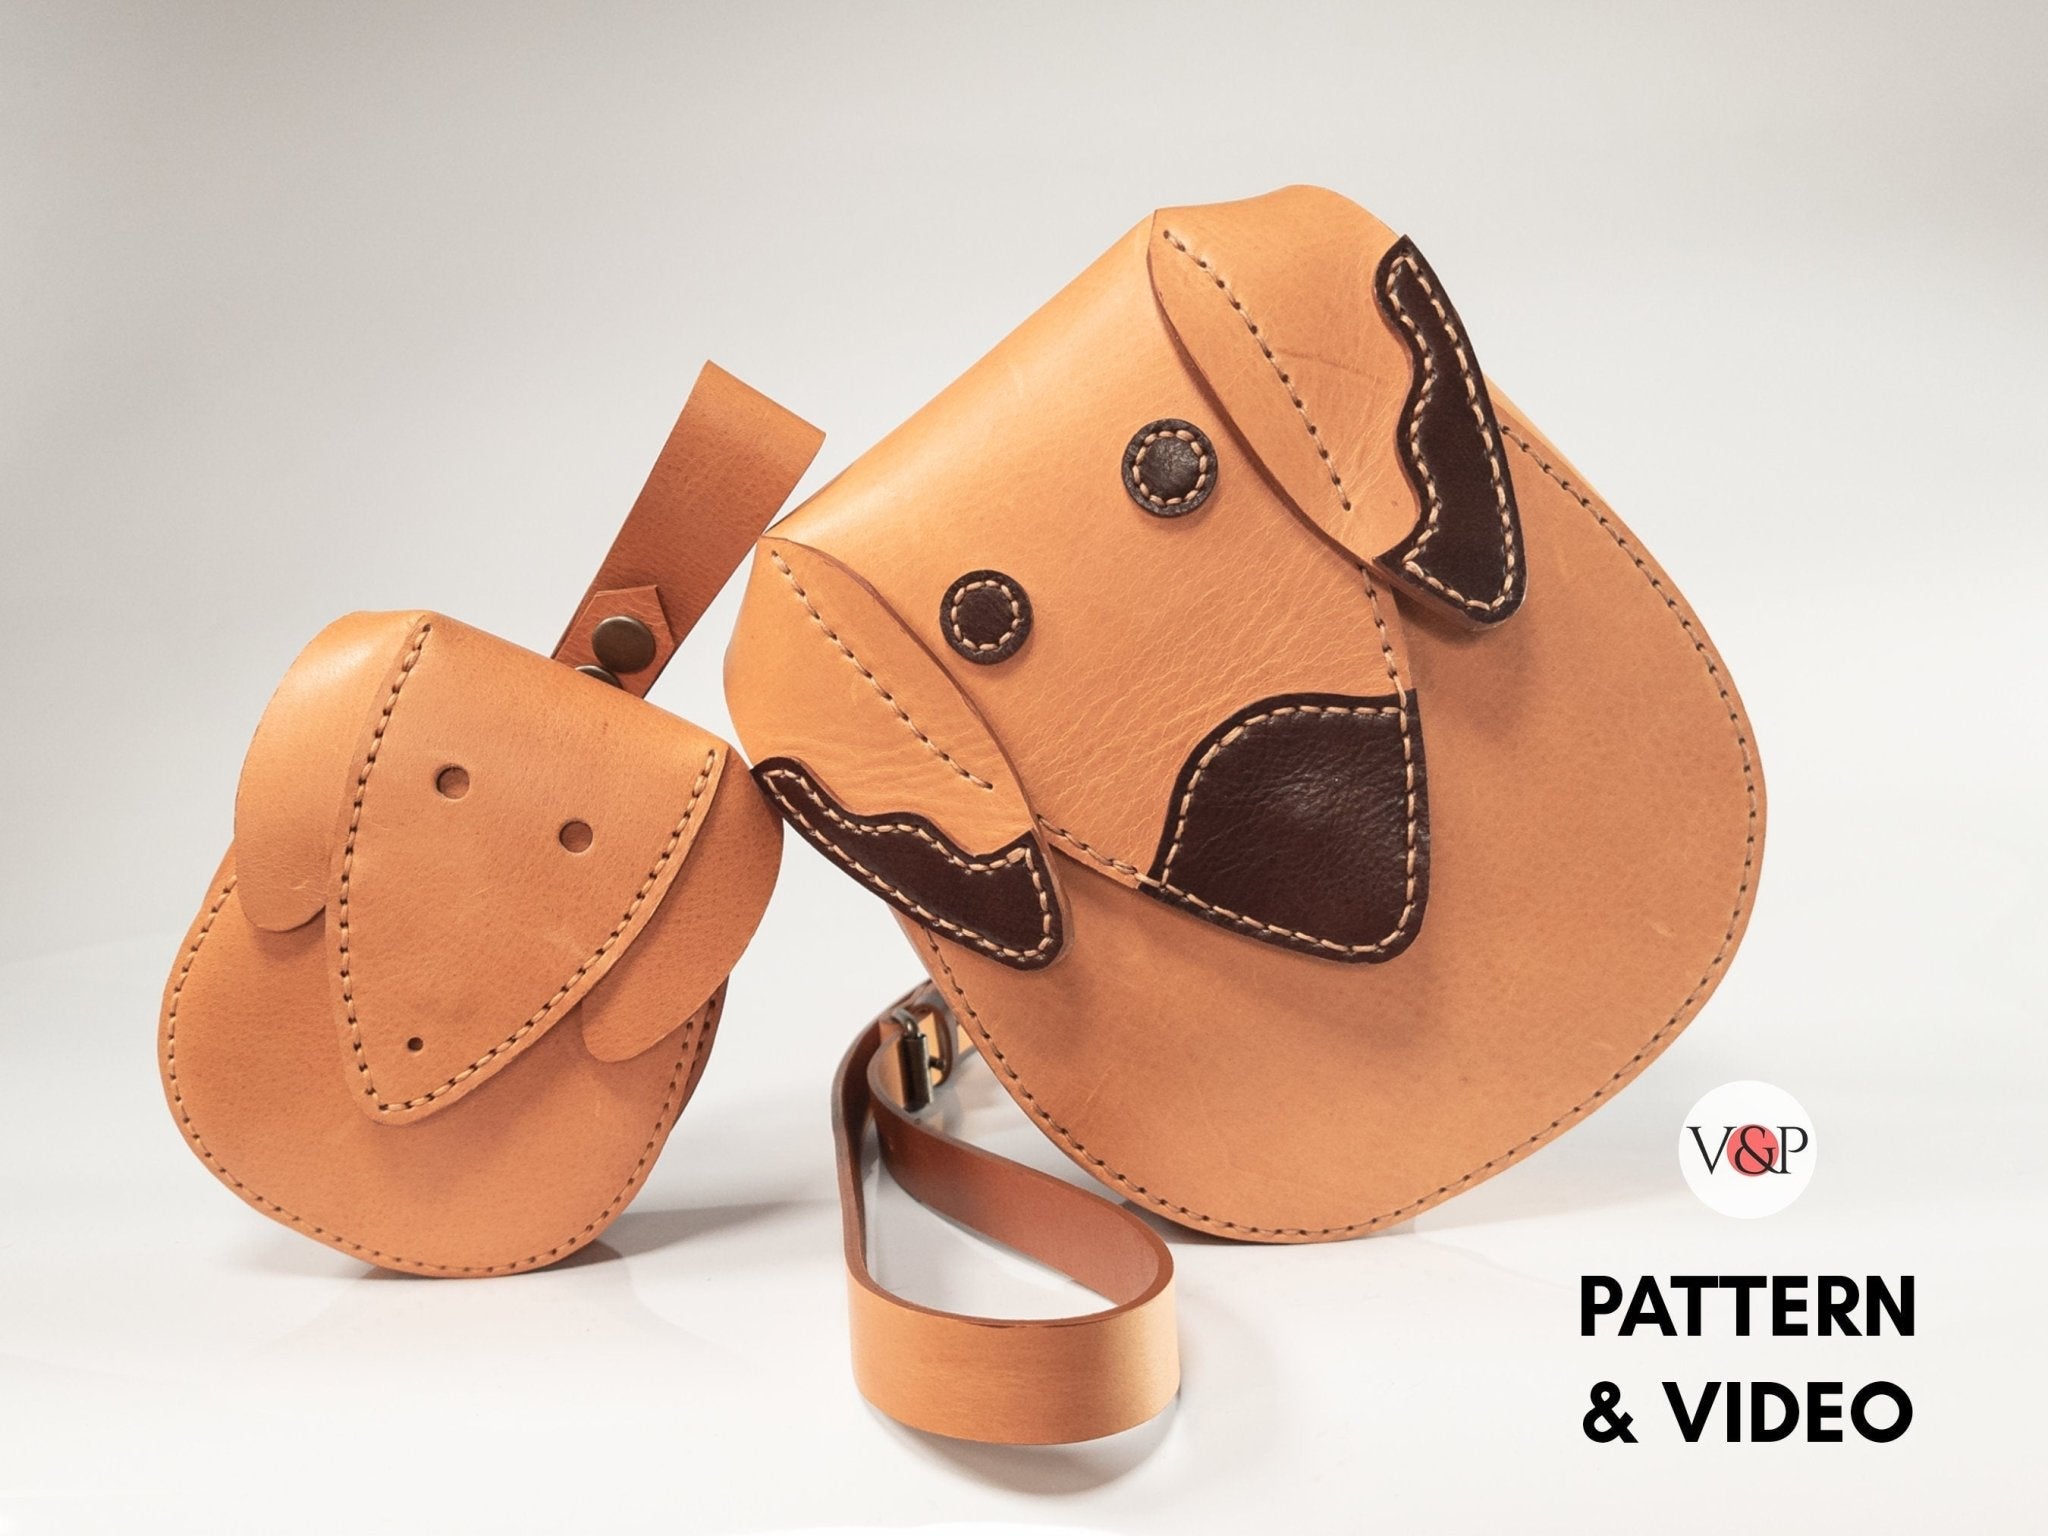 Dog Shape Bag + Fanny Pack, PDF Pattern and Video by Vasile and Pavel - Vasile and Pavel Leather Patterns